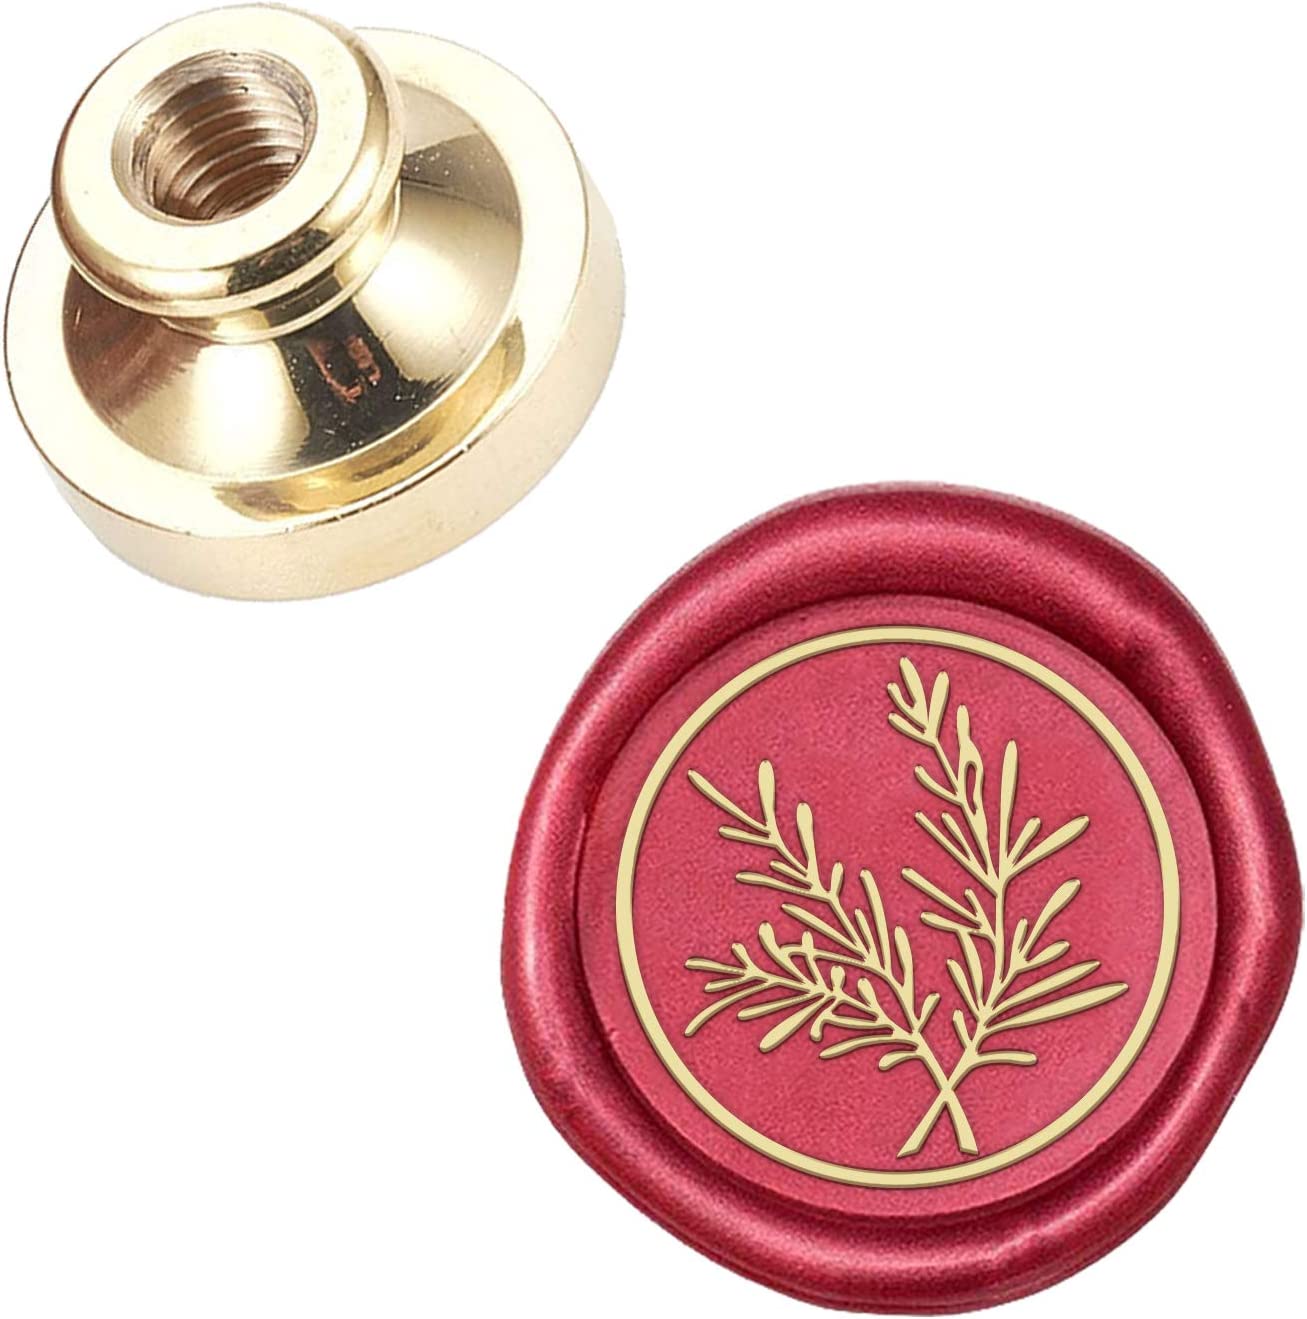 1pc Wax Seal Stamp Head Fern Leaf Removable Sealing Brass Stamp Head for  Creative Gift Envelopes Invitations Cards Decoration 